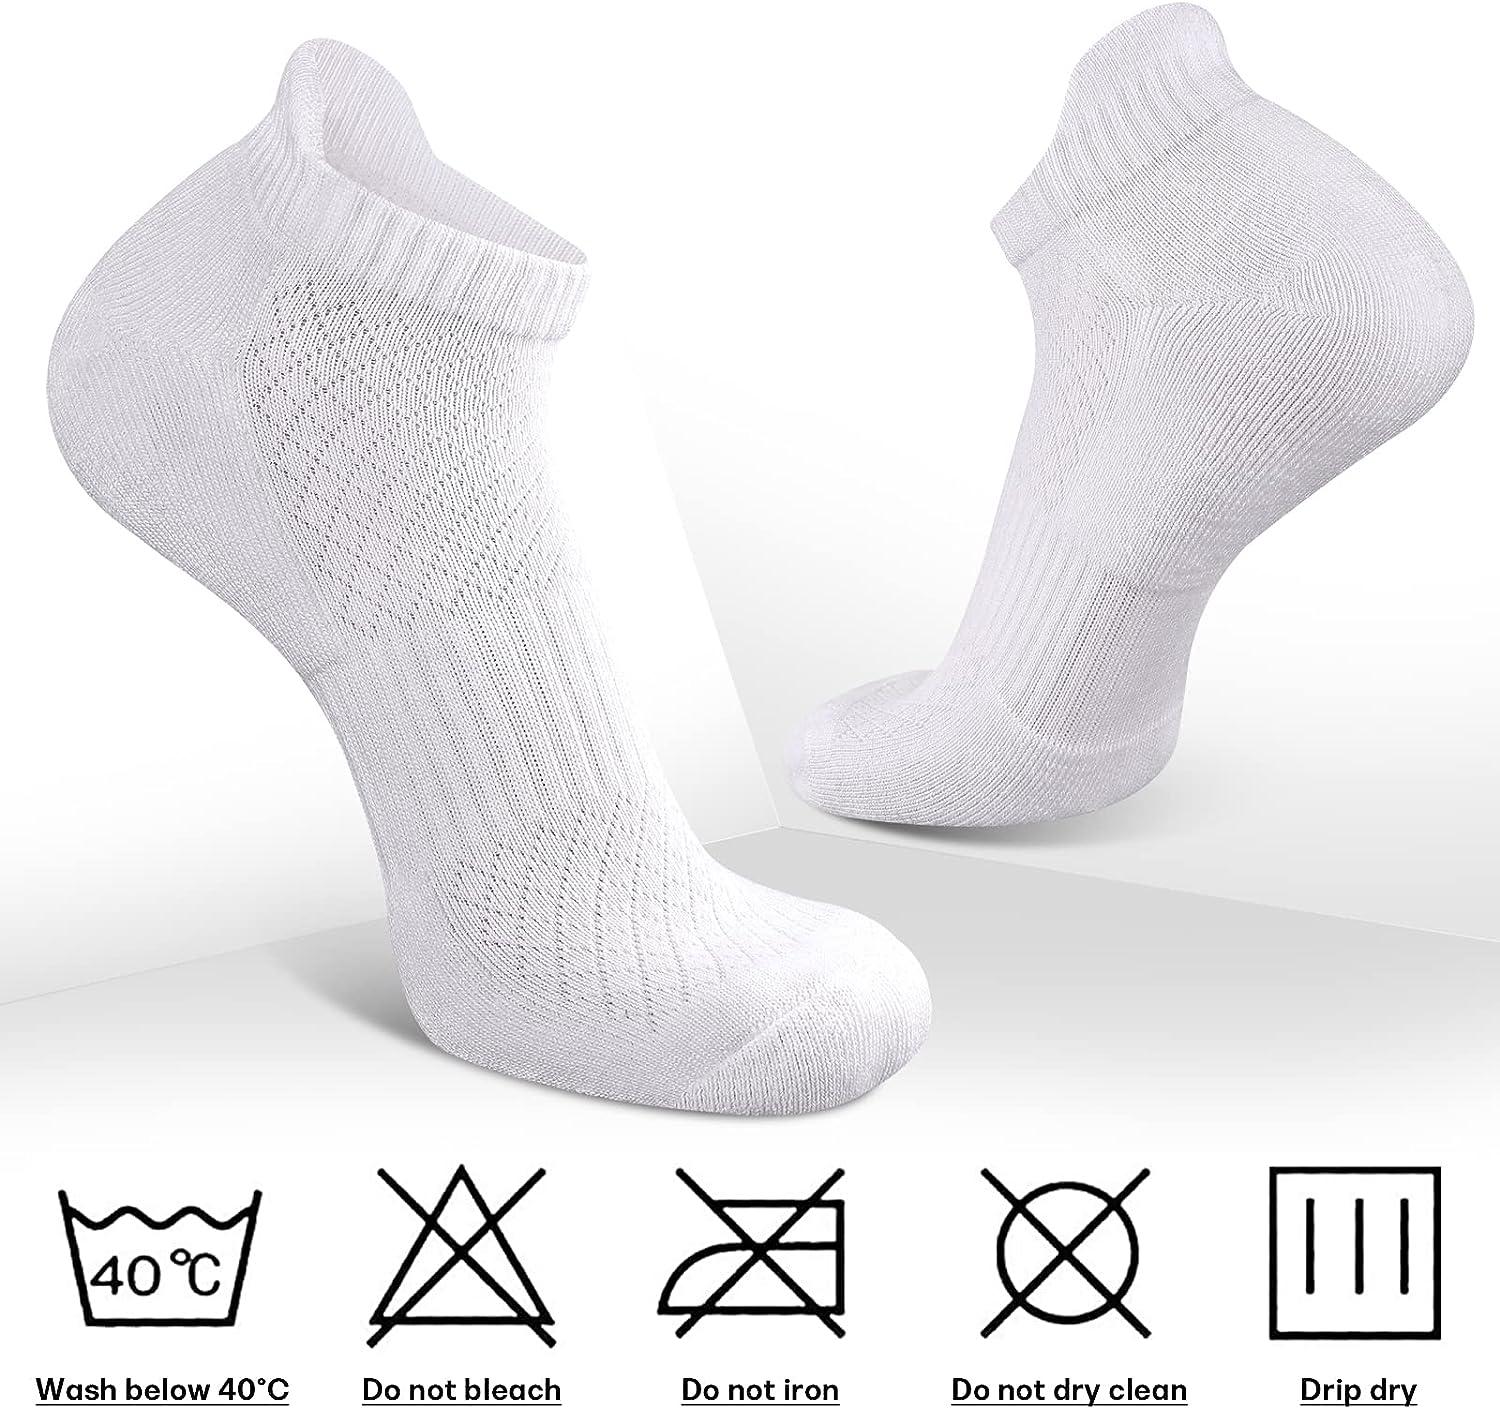 COOPLUS Male Sock Size 10-13 Men’s Athletic Ankle Performance Low Cut Socks  6 Pairs